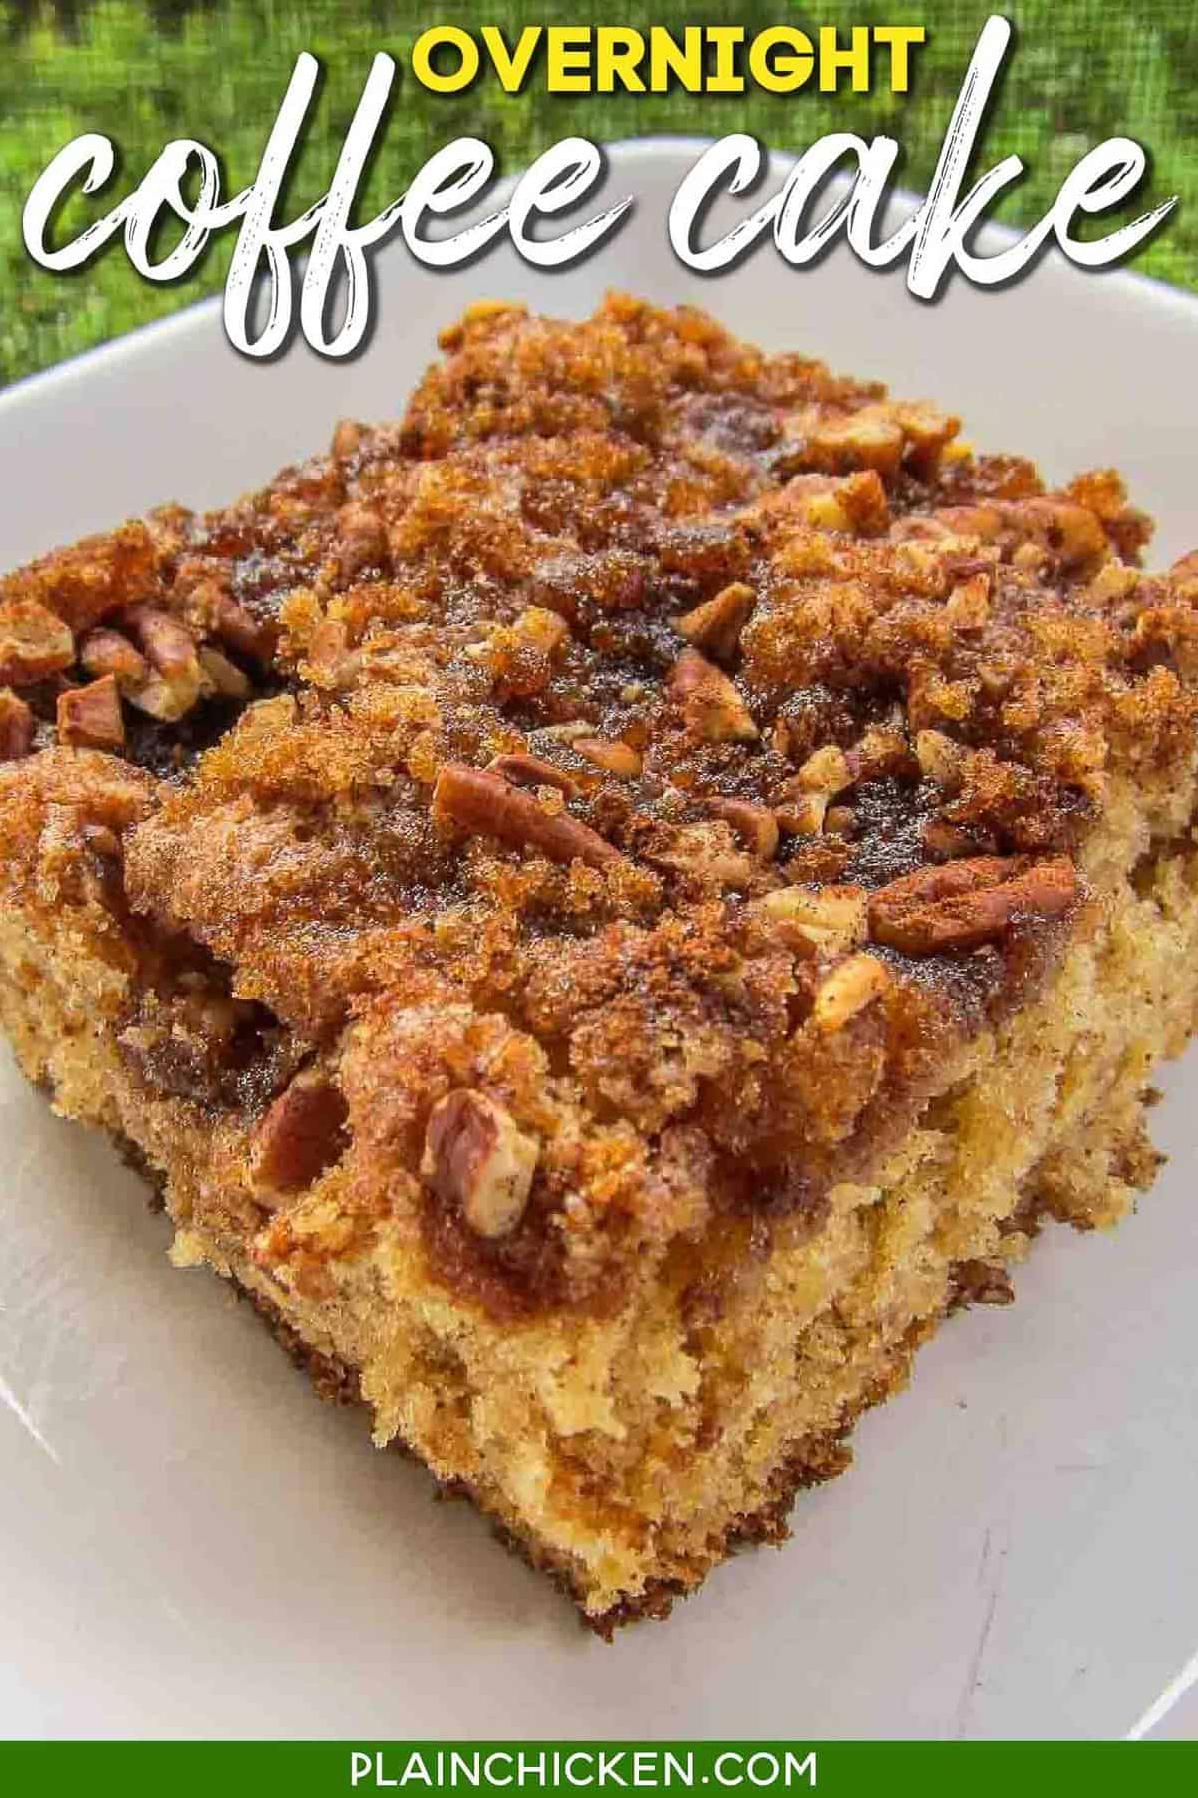  Enjoy the rich, buttery crumb topping that simply melts in your mouth.